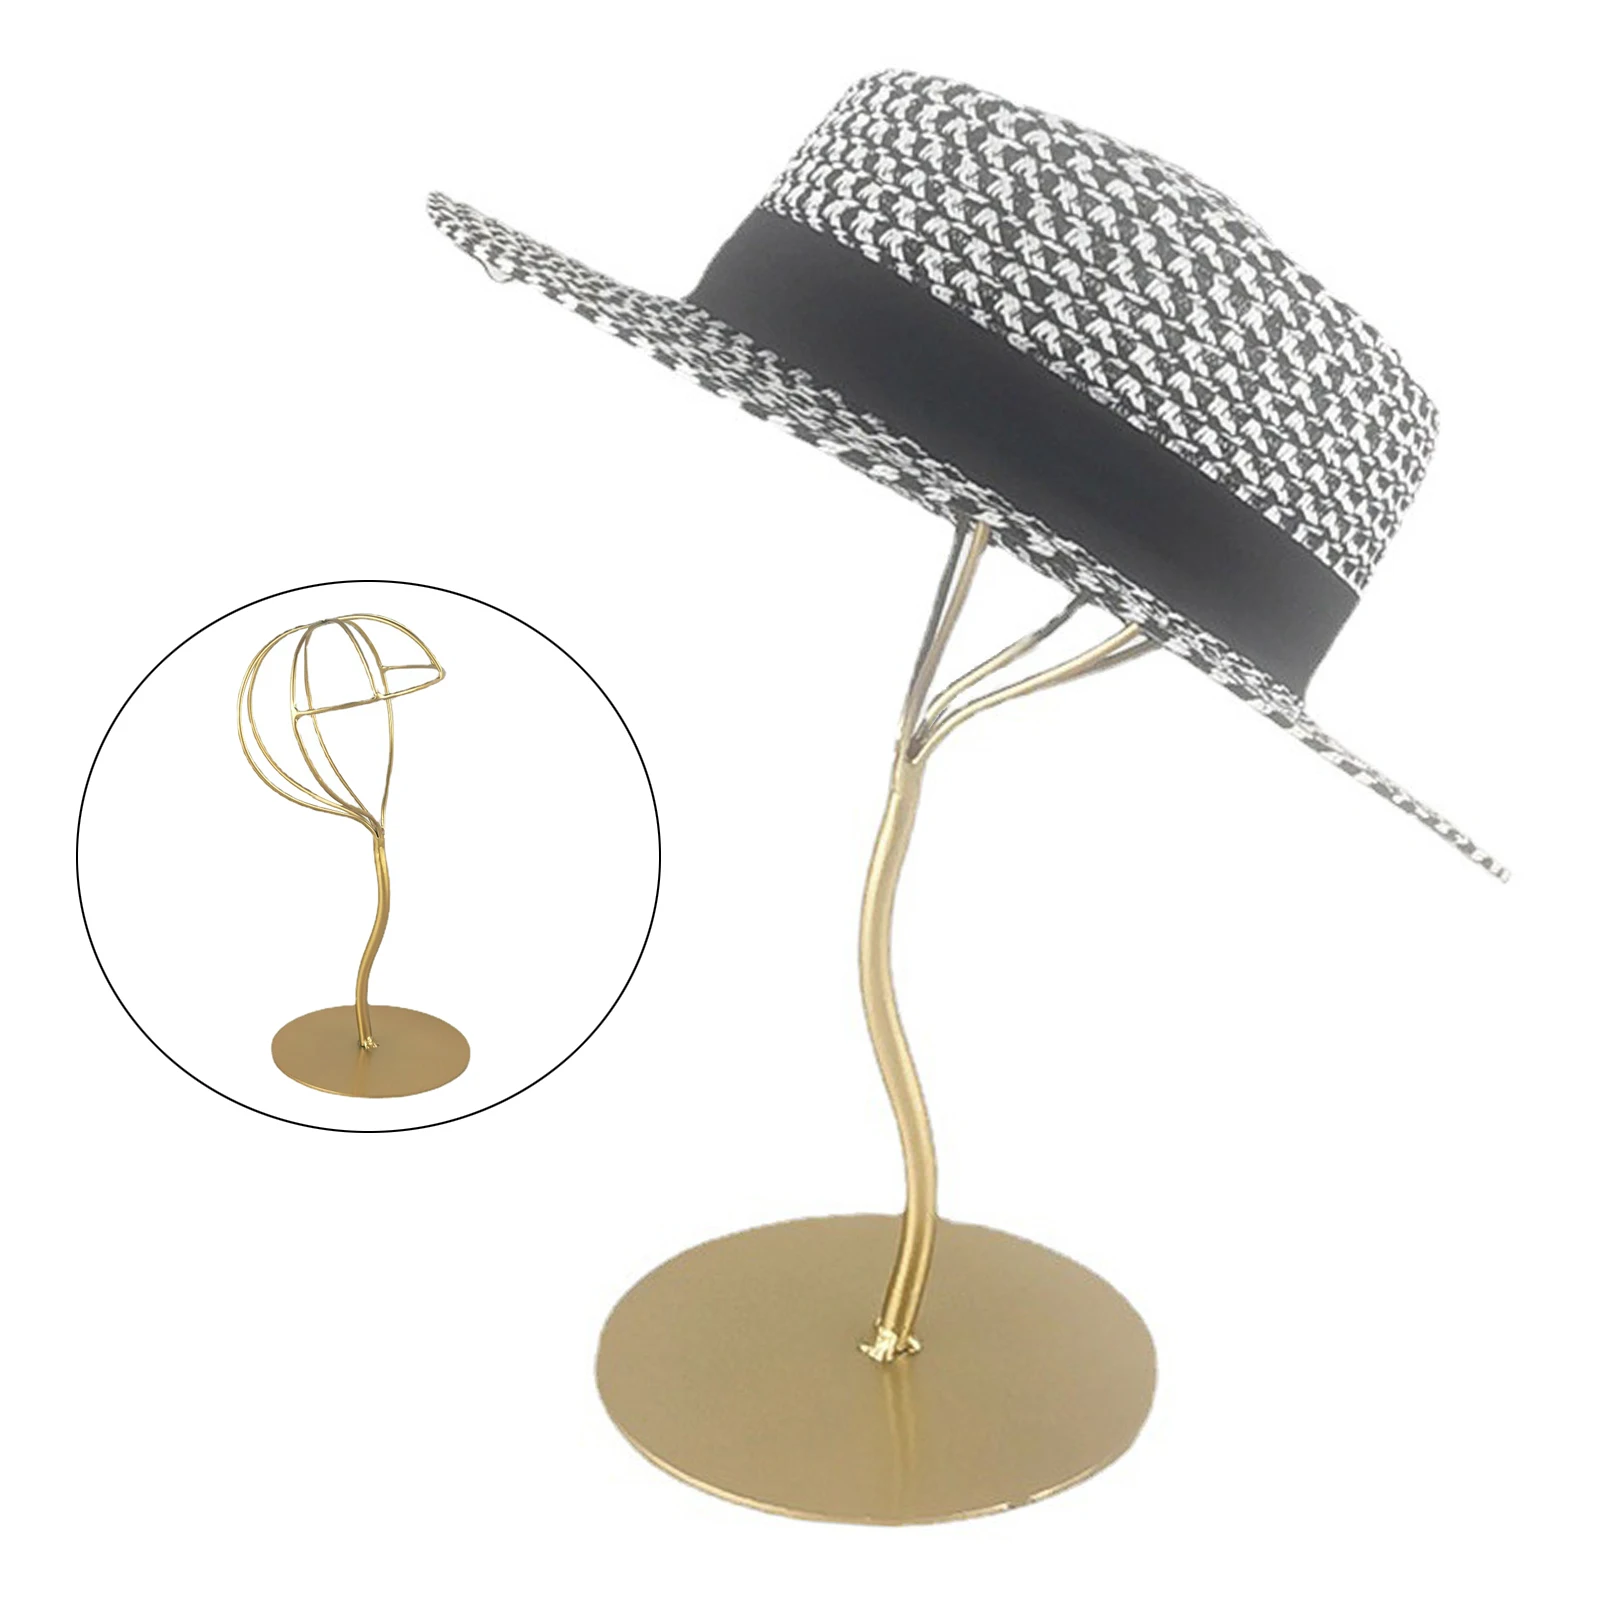 Elegant Stable Durable Metal Hat Holder Decorative Wig Styling Drying Fedora Display Stand Rack Organizer for Shop